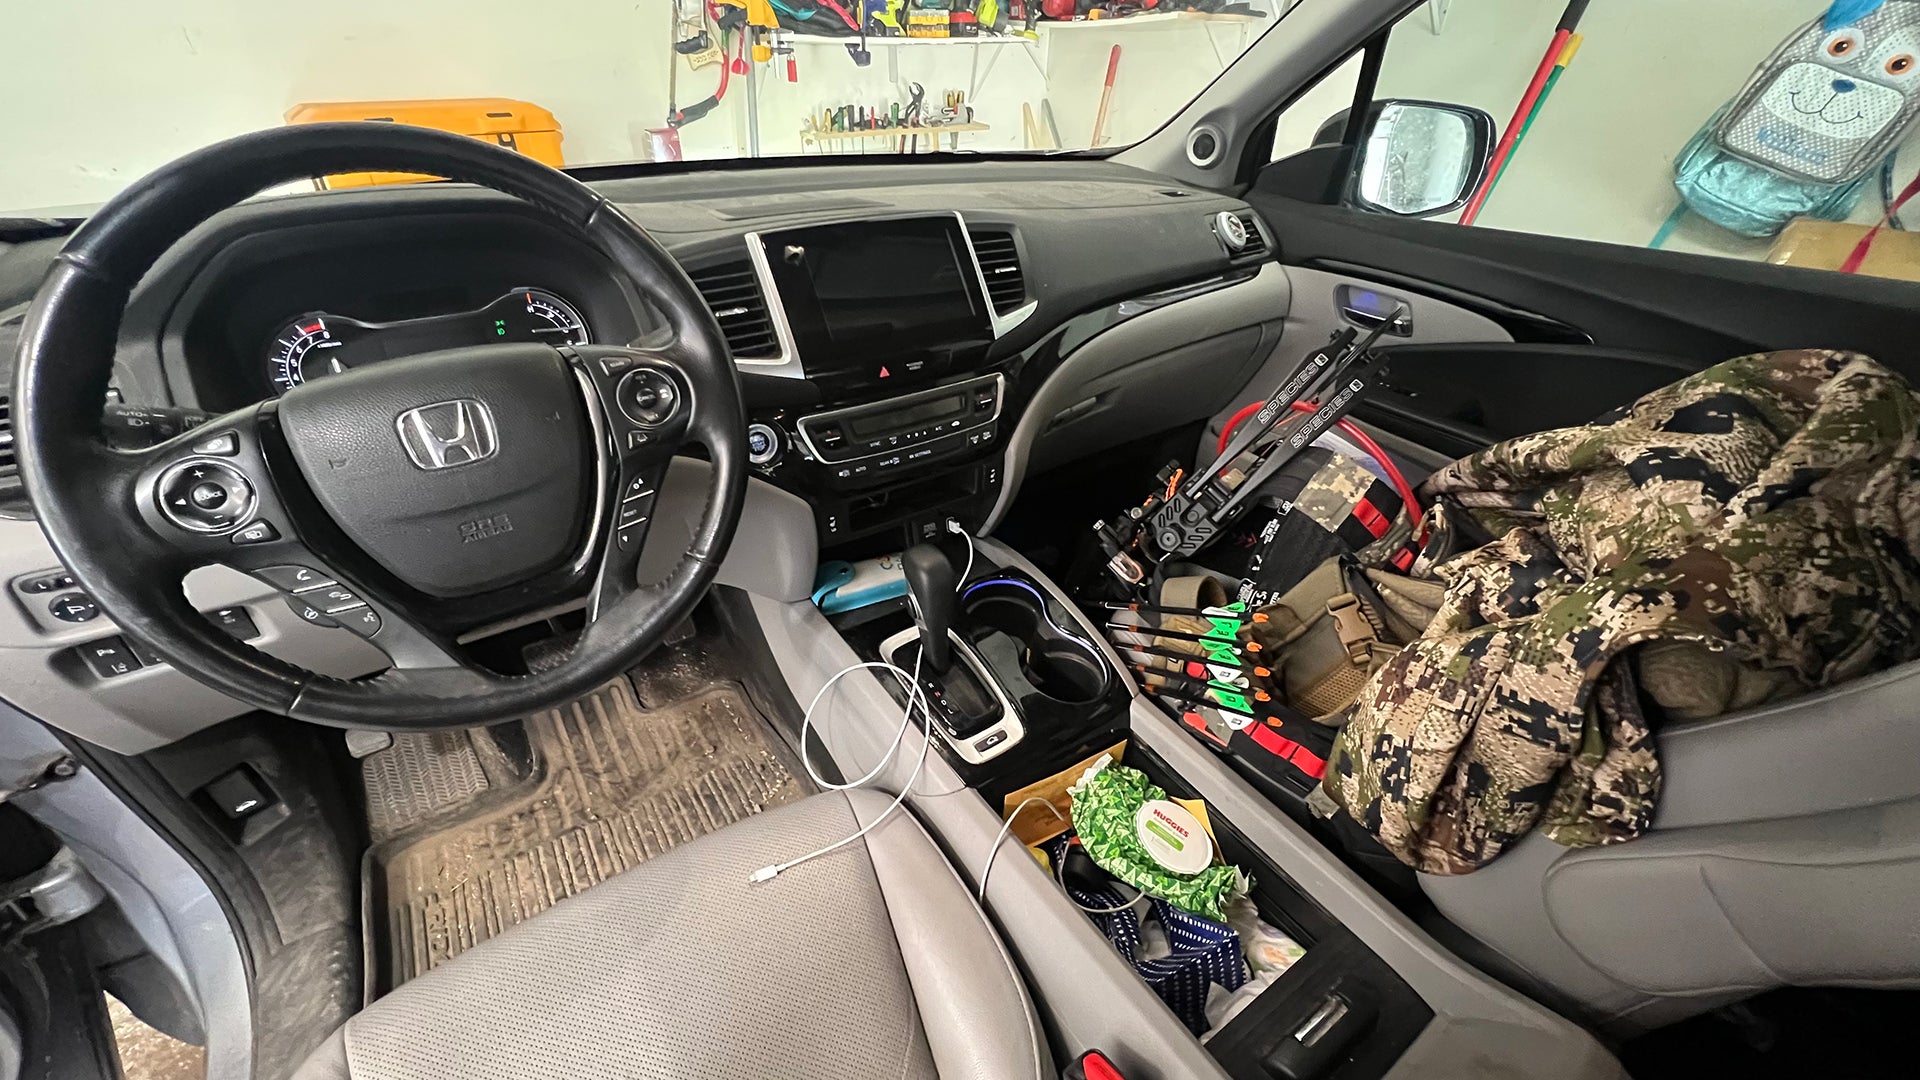 How to Deep Clean Your Car's Interior, According to Experts